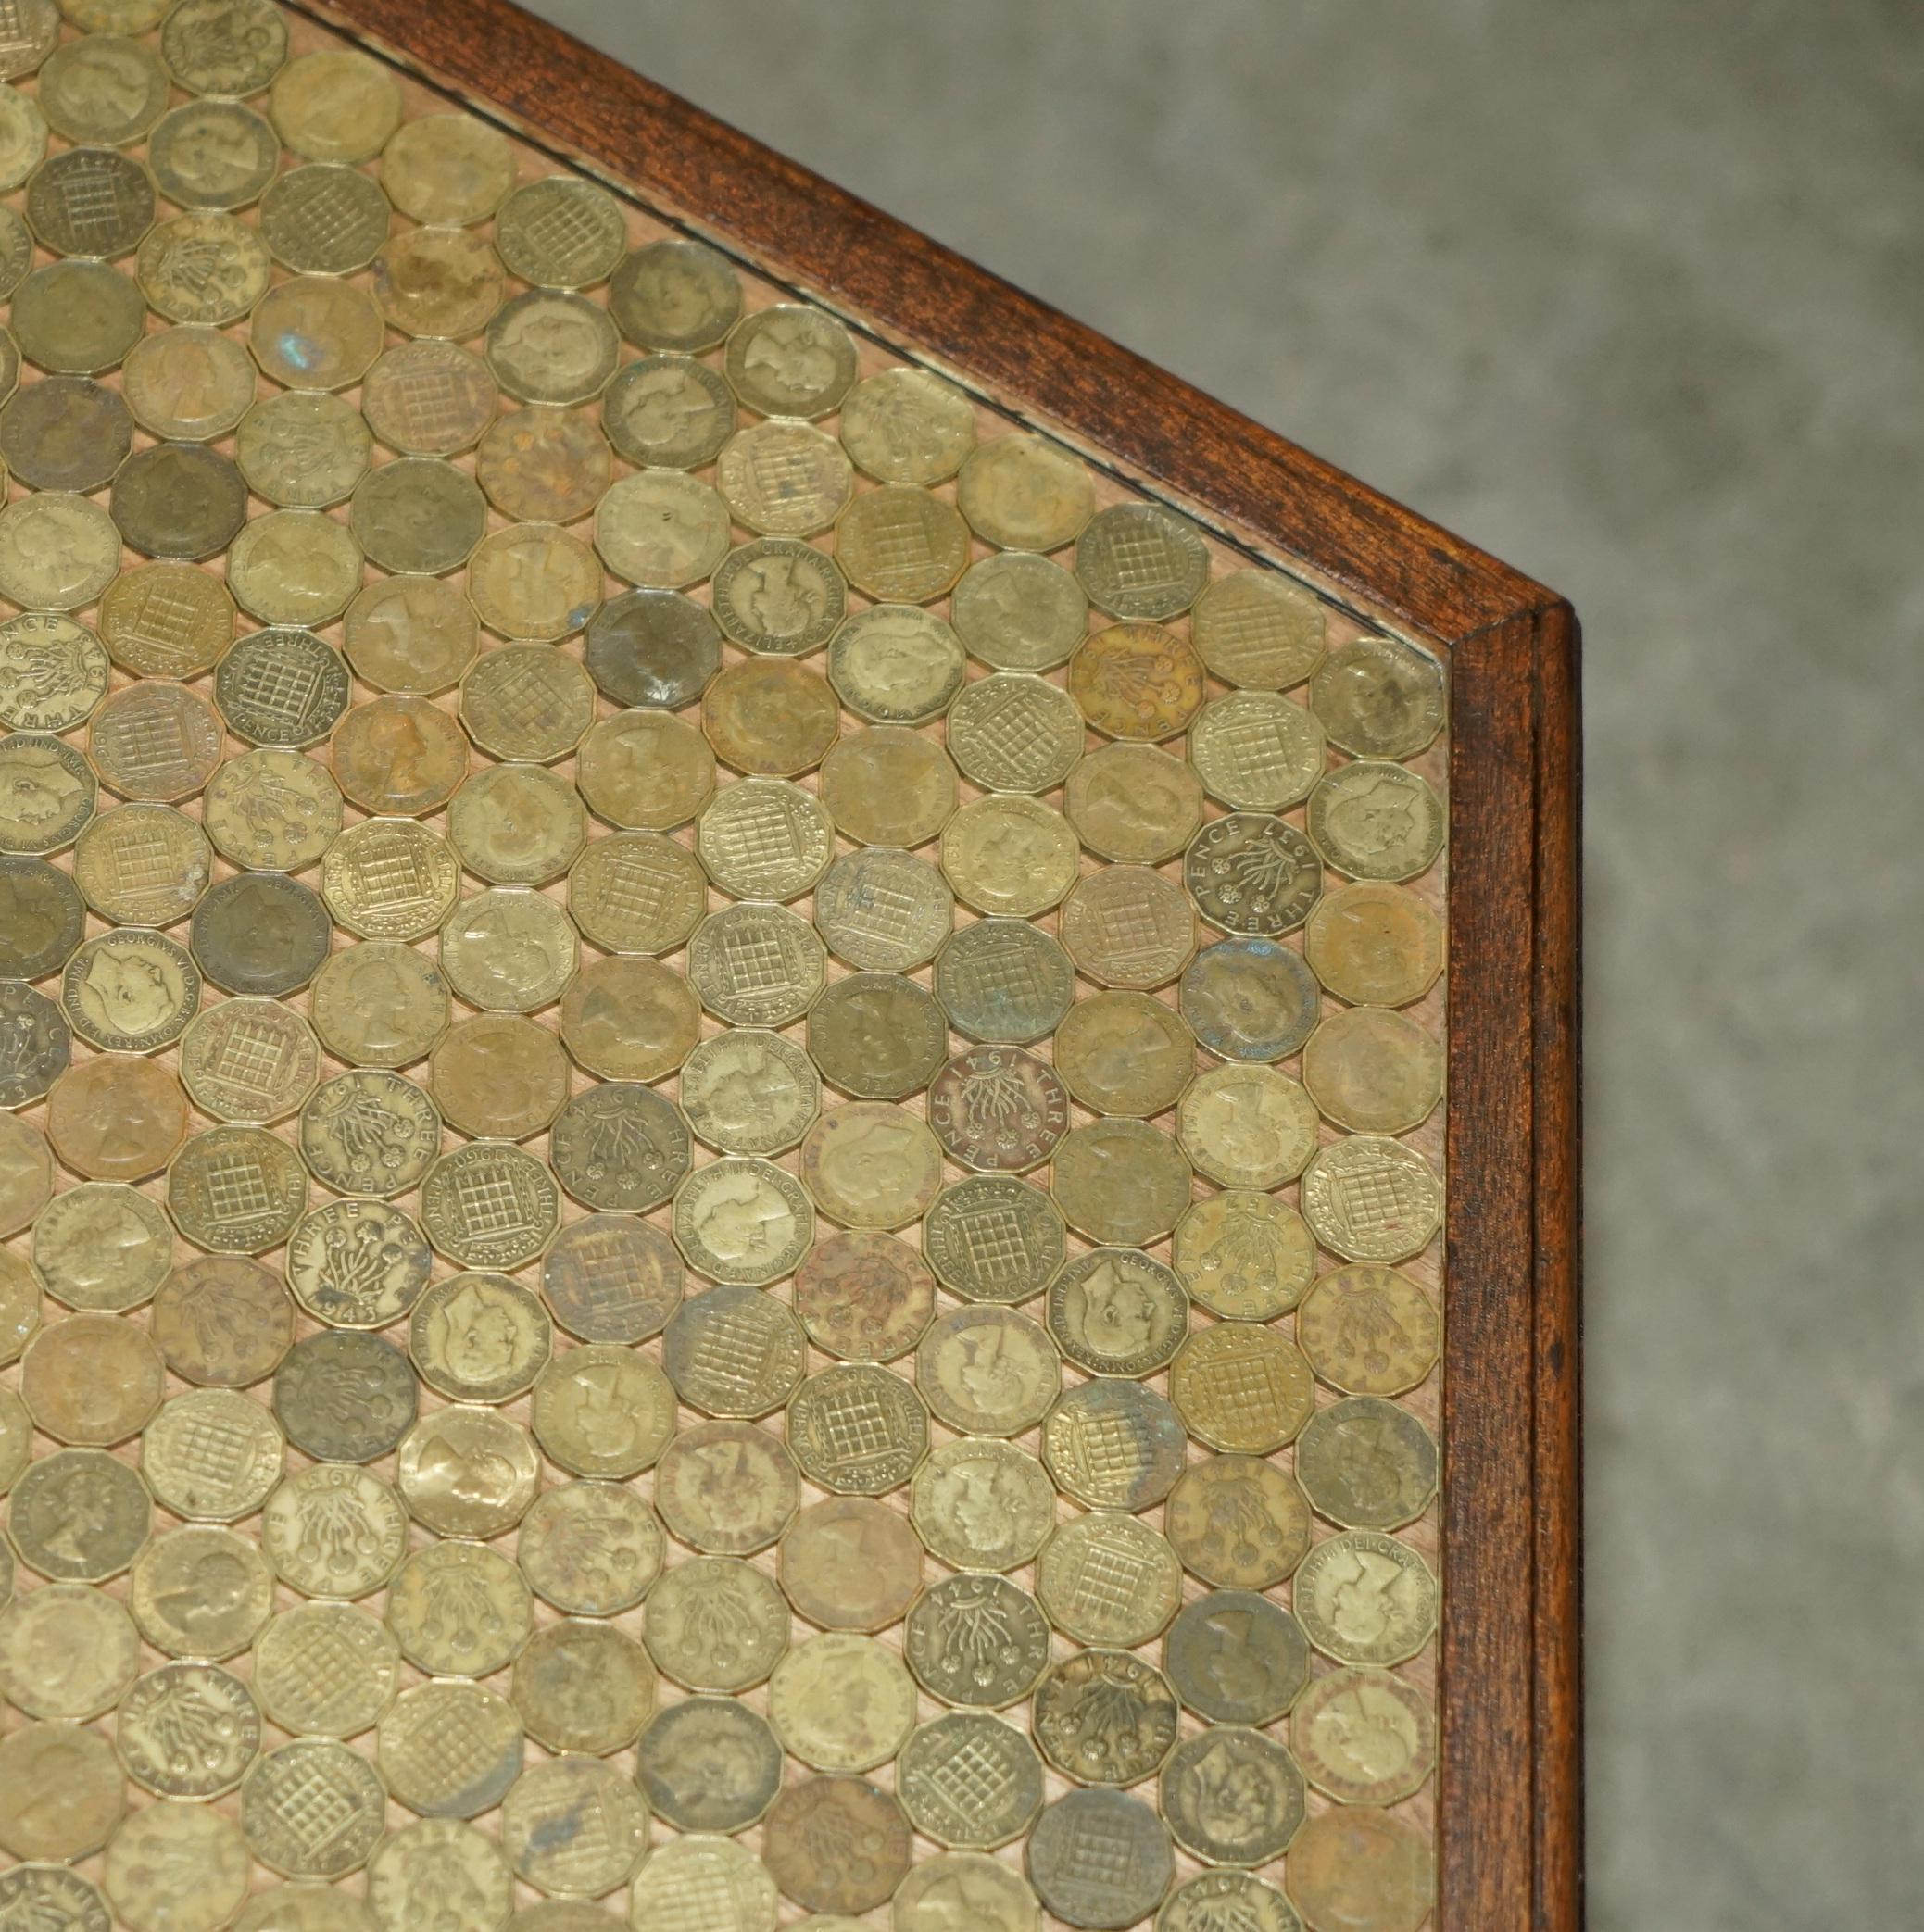 ANTIQUE CIRCA 1920 COFFEE TABLE COVERS IN ENGLISH THREE PENCE COINS FROM 1940er Jahre (Frühes 20. Jahrhundert) im Angebot